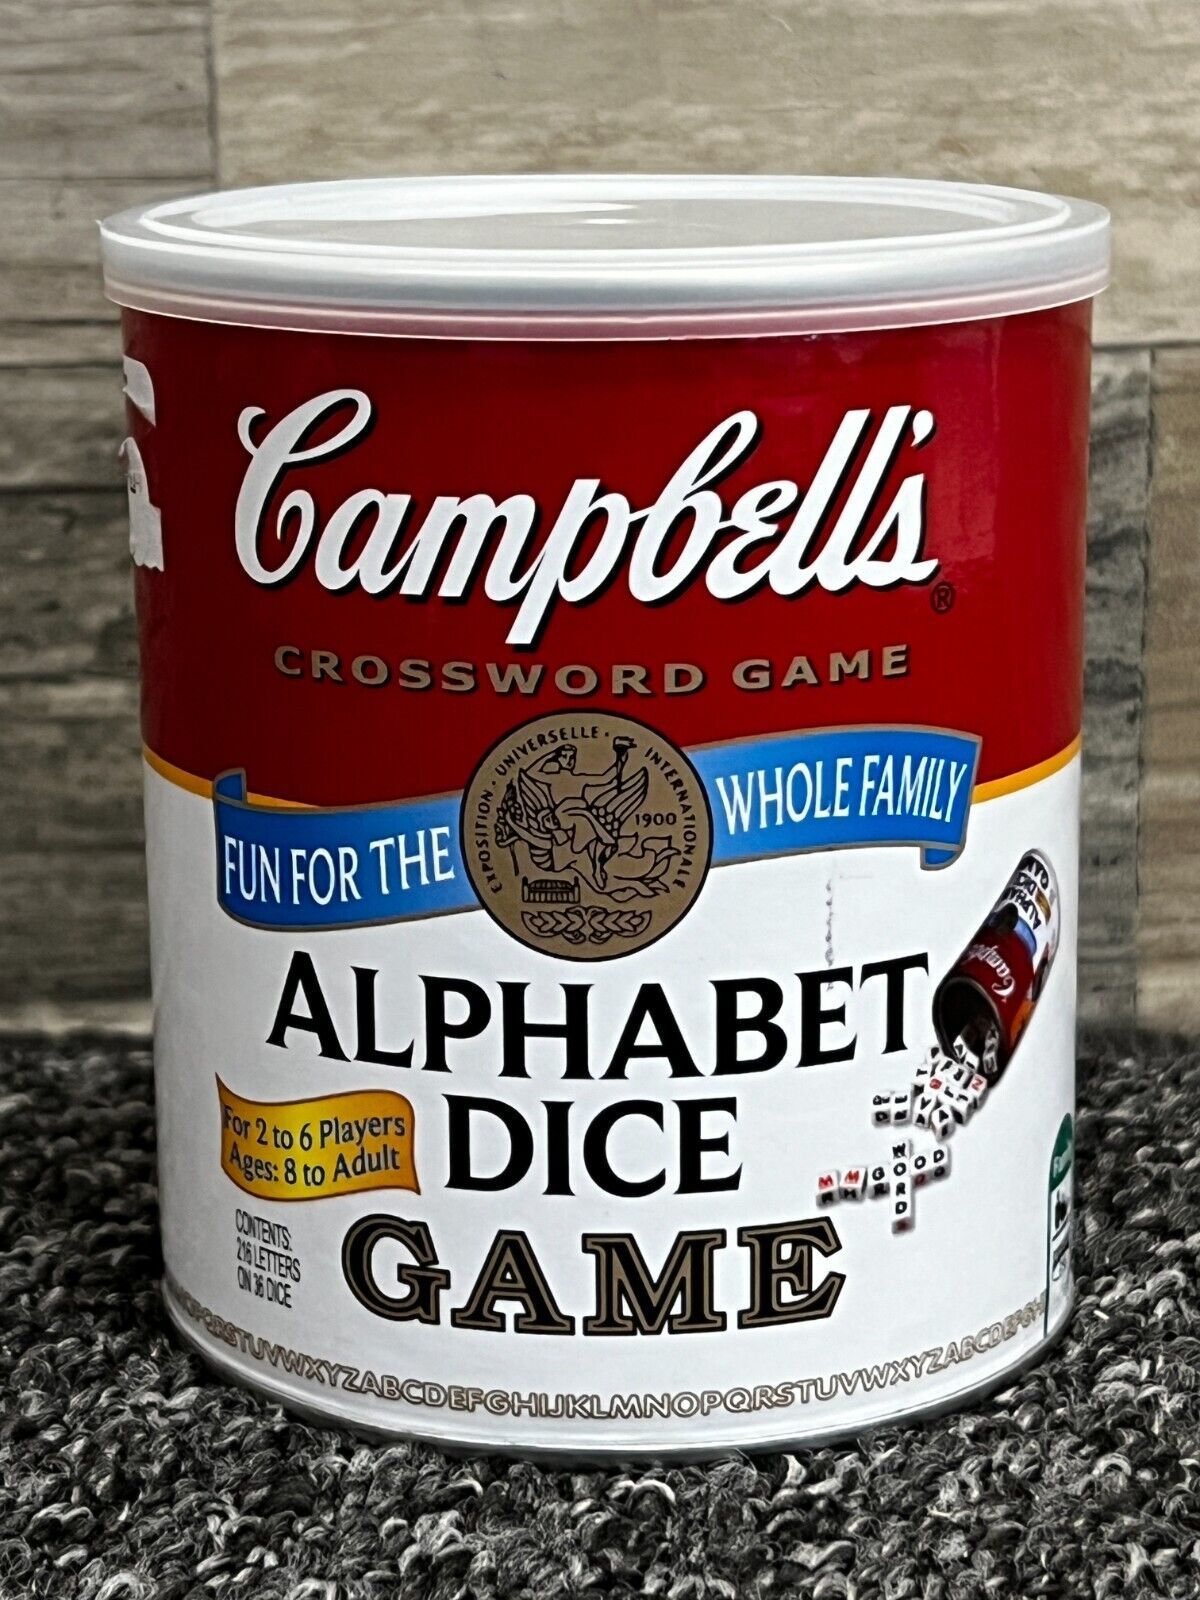 Campbell’s Crossword Alphabet Dice Game By TDC Games - Soup Can - New! - $13.54